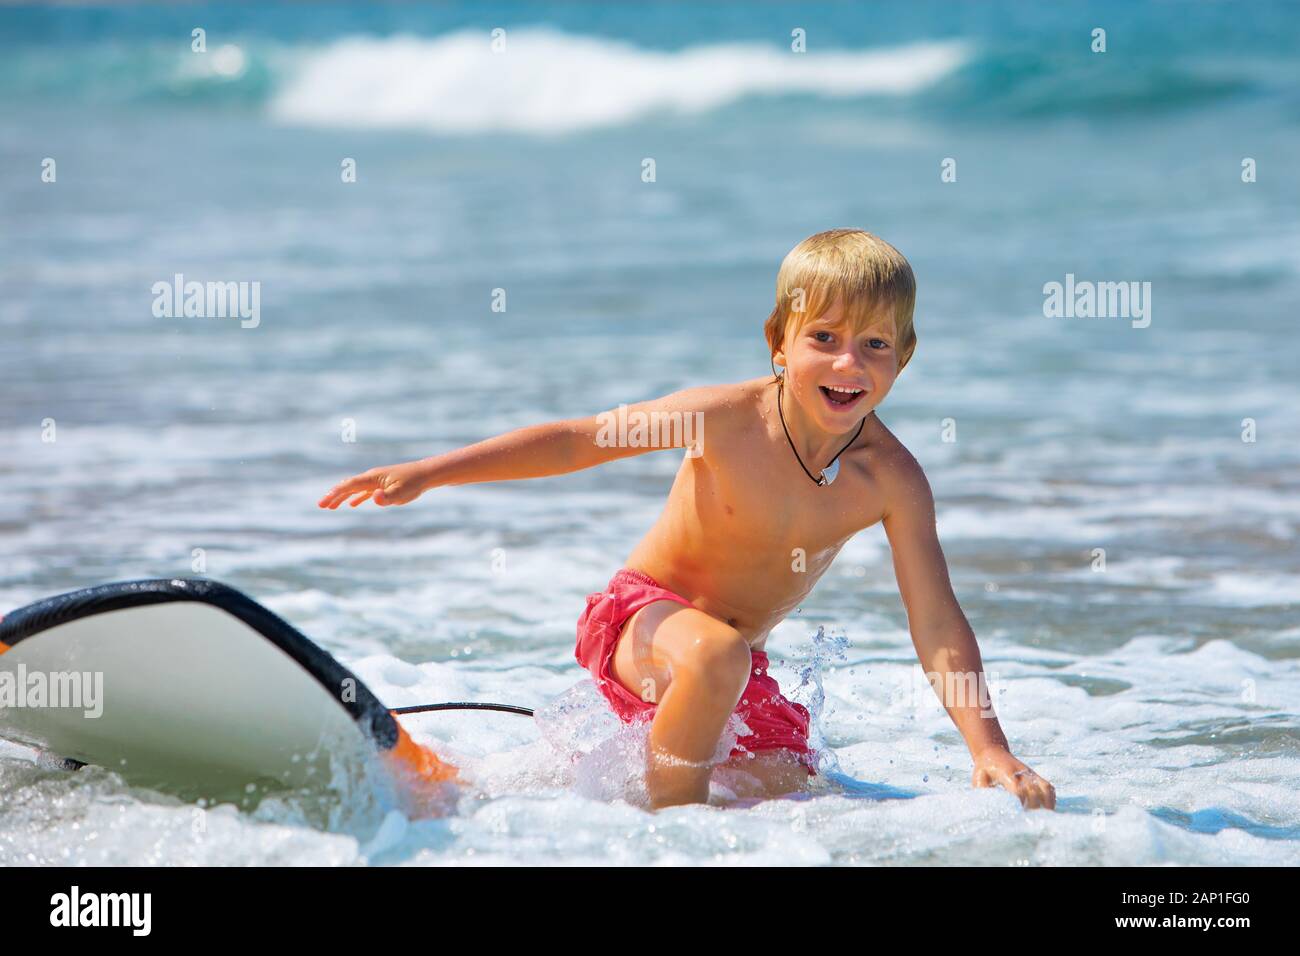 Happy boy - young surfer learning ride, jump from surfboard, run to beach. Active family lifestyle. Kids surf lessons, outdoor water sport activity Stock Photo